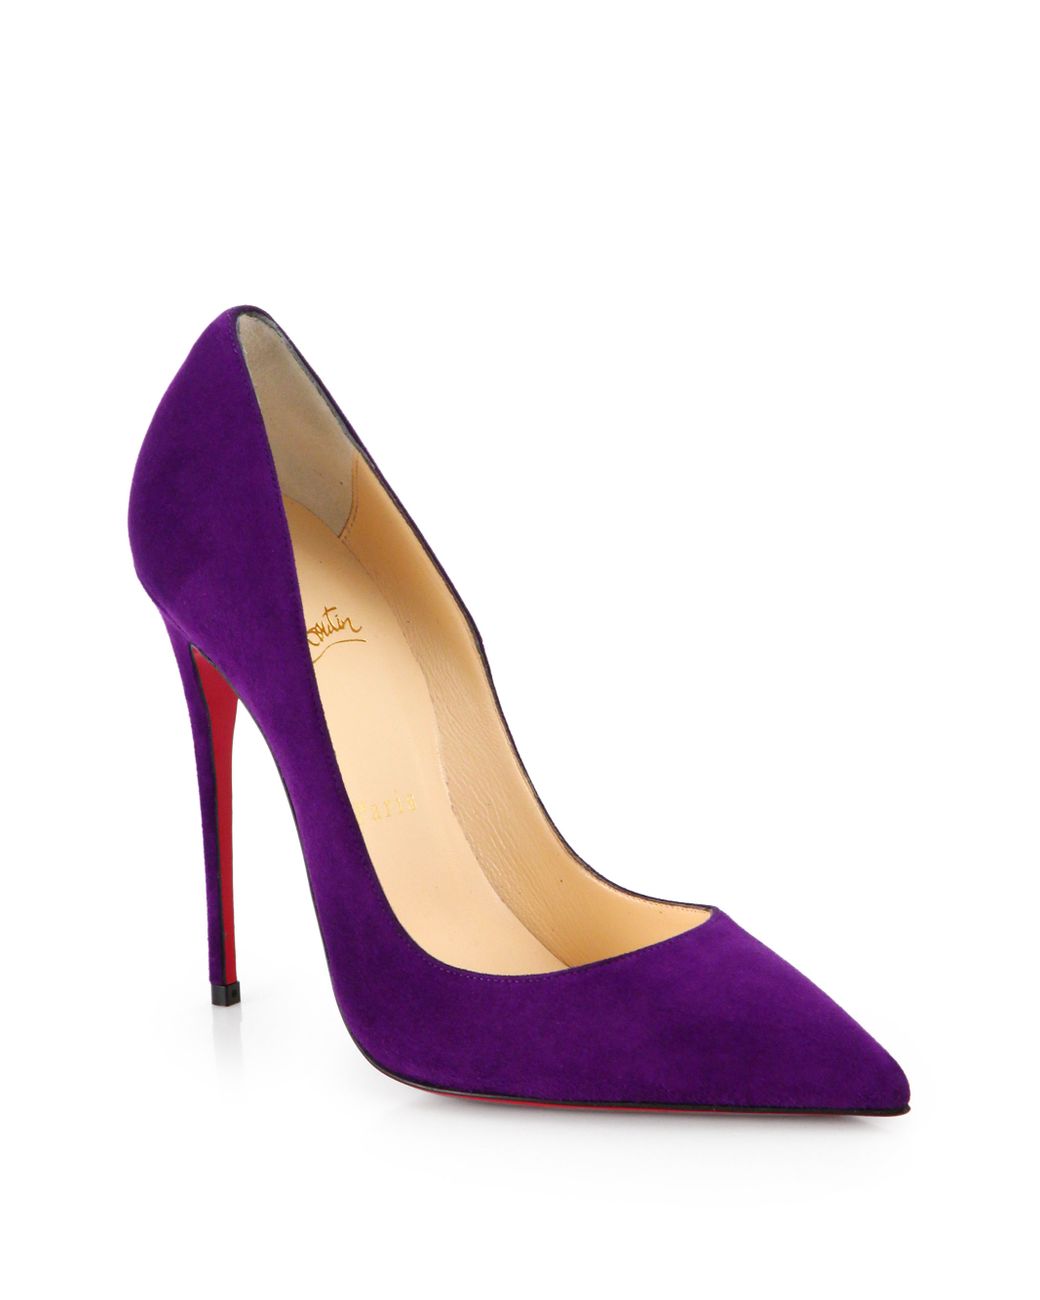 Christian Louboutin So Kate 120 Suede Pumps